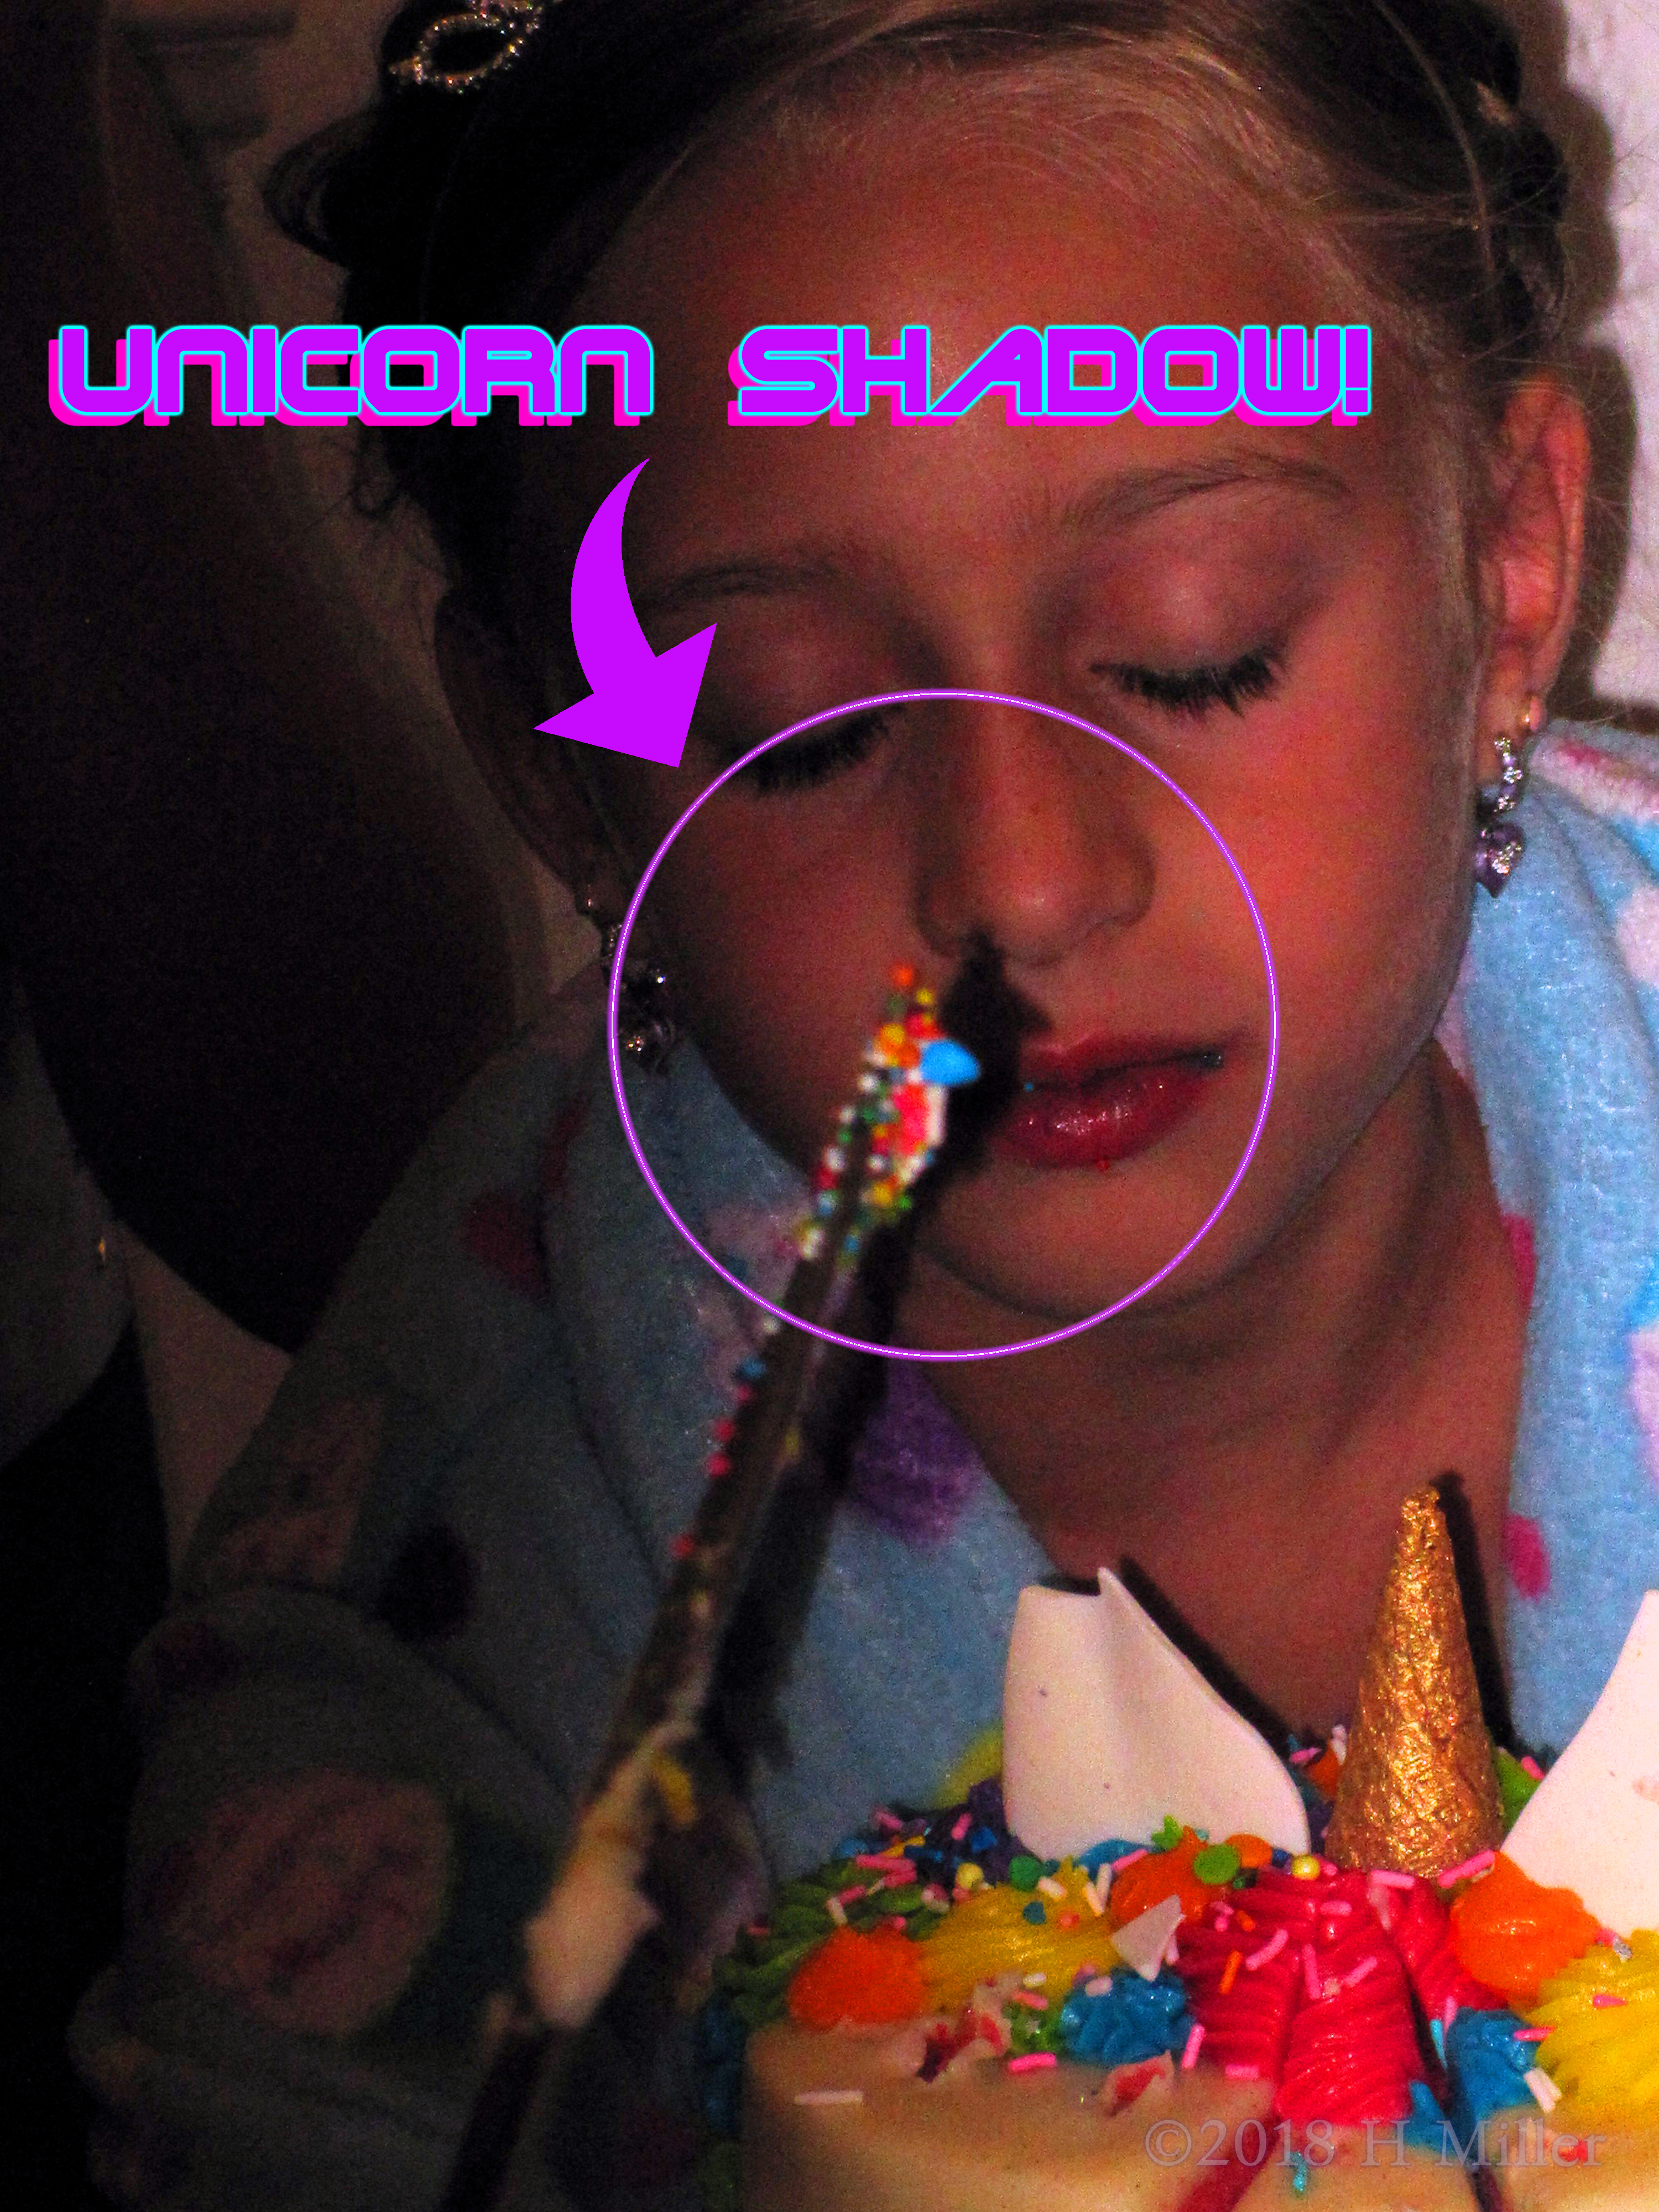 Beautiful Picture With The Unicorn Shadow On The Birthday Girl's Face! 